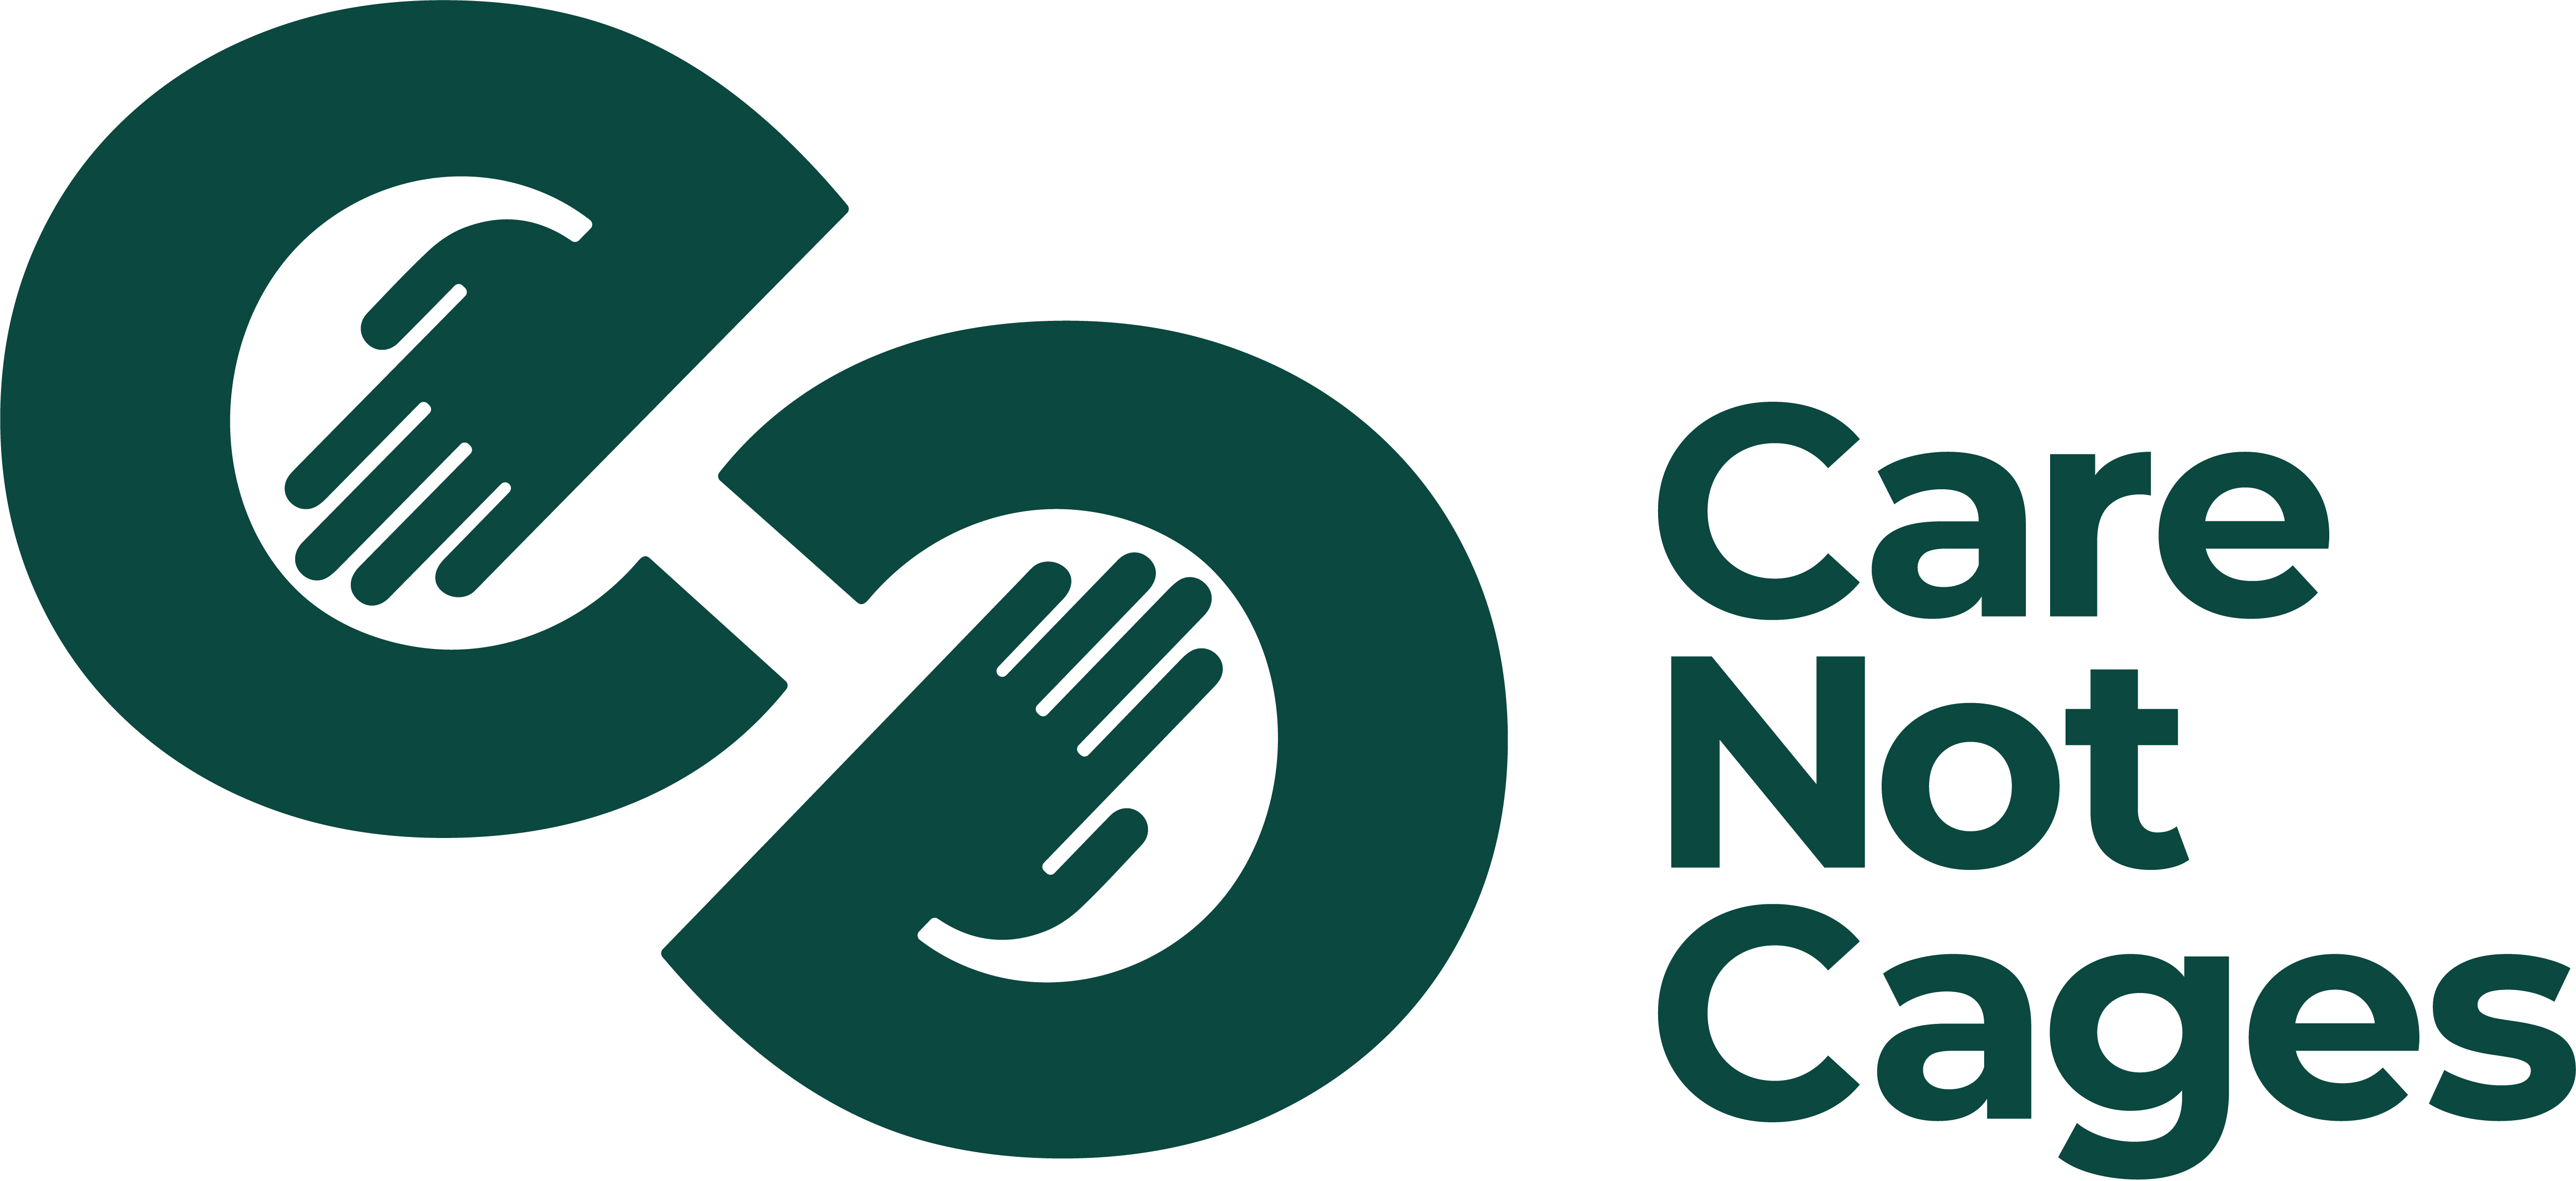 Care Not Cages logo, two Cs with hands reaching into them.